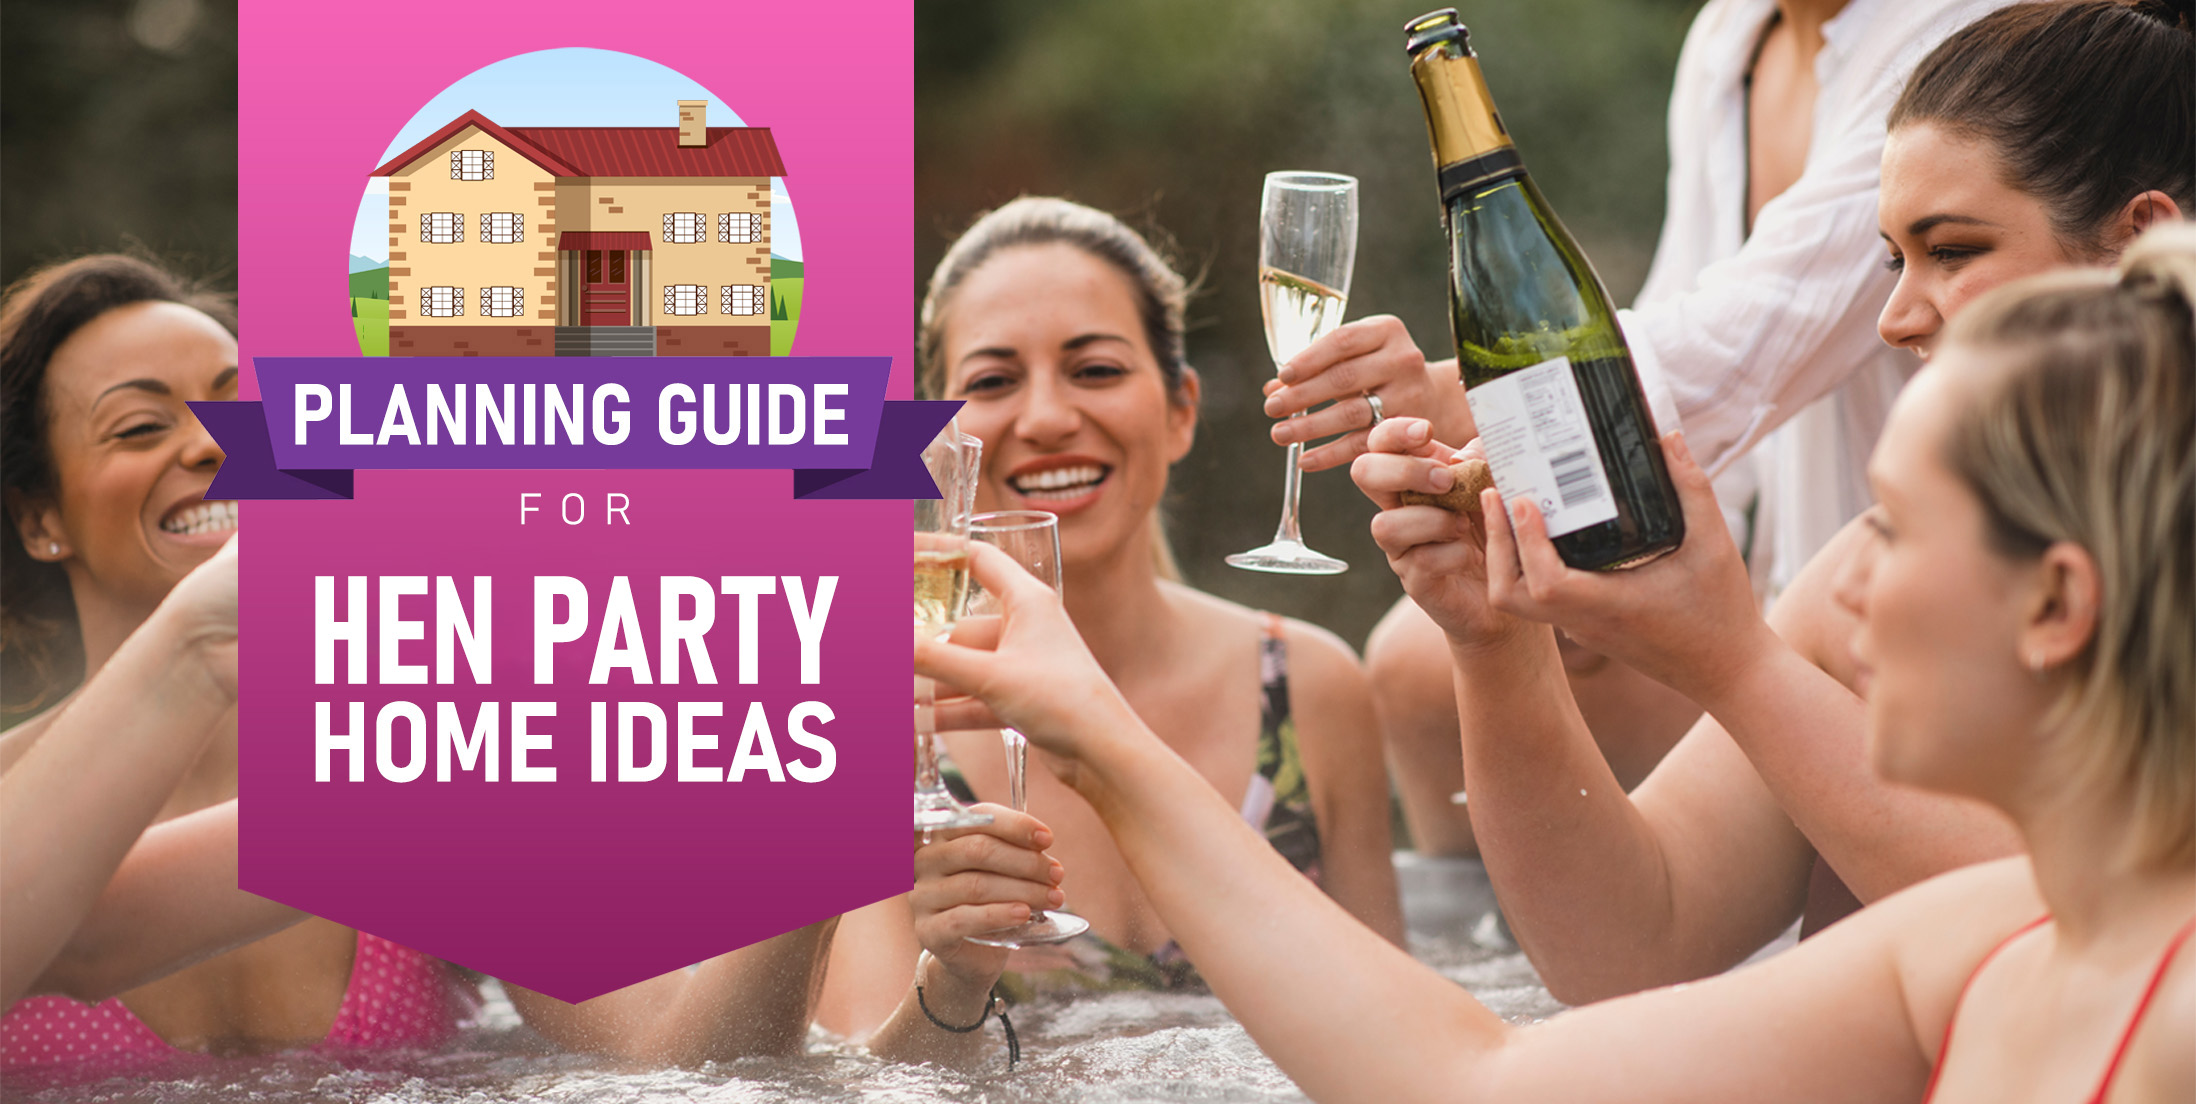 Planning Guide for Home Hen Party Ideas